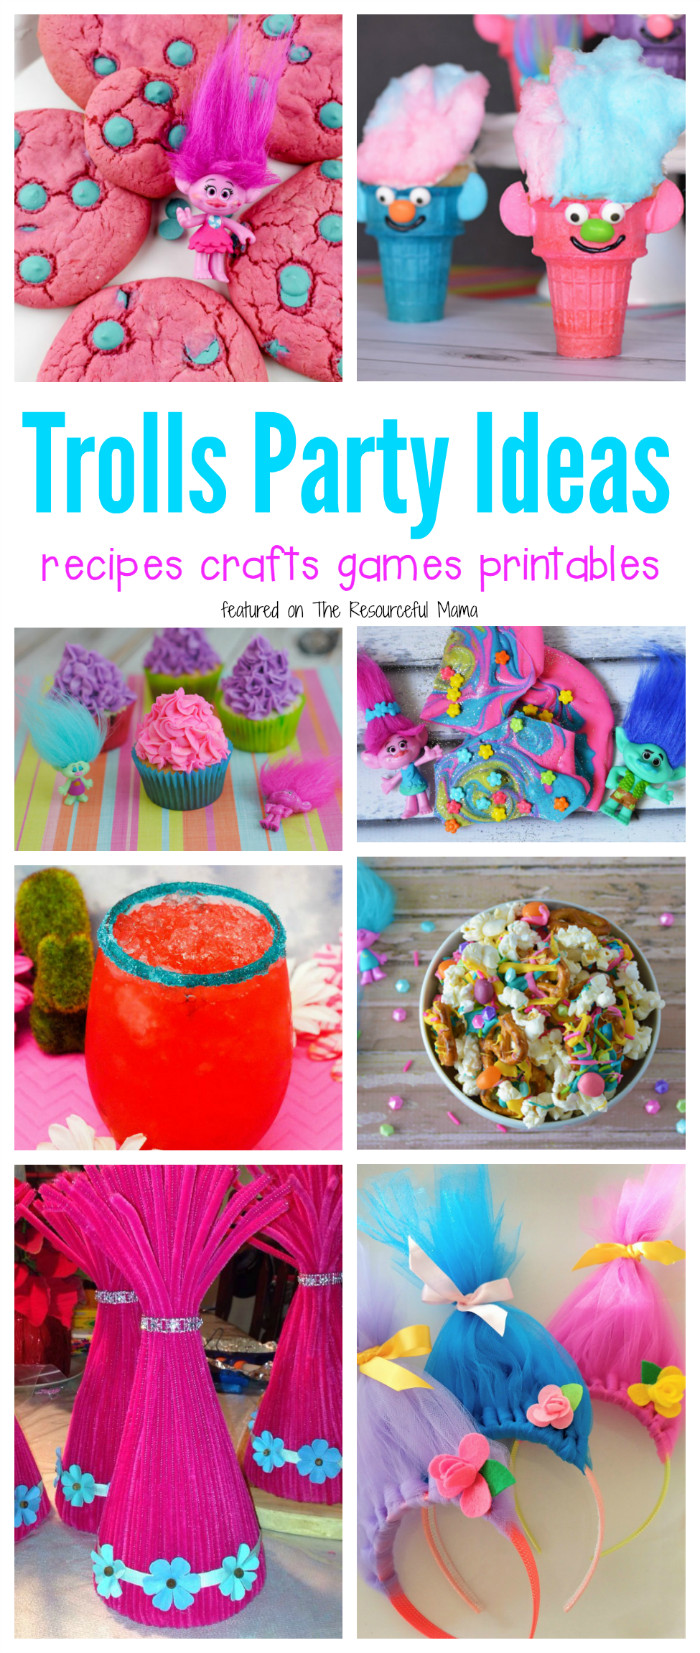 Troll Party Food Ideas
 Pin on The Resourceful Mama